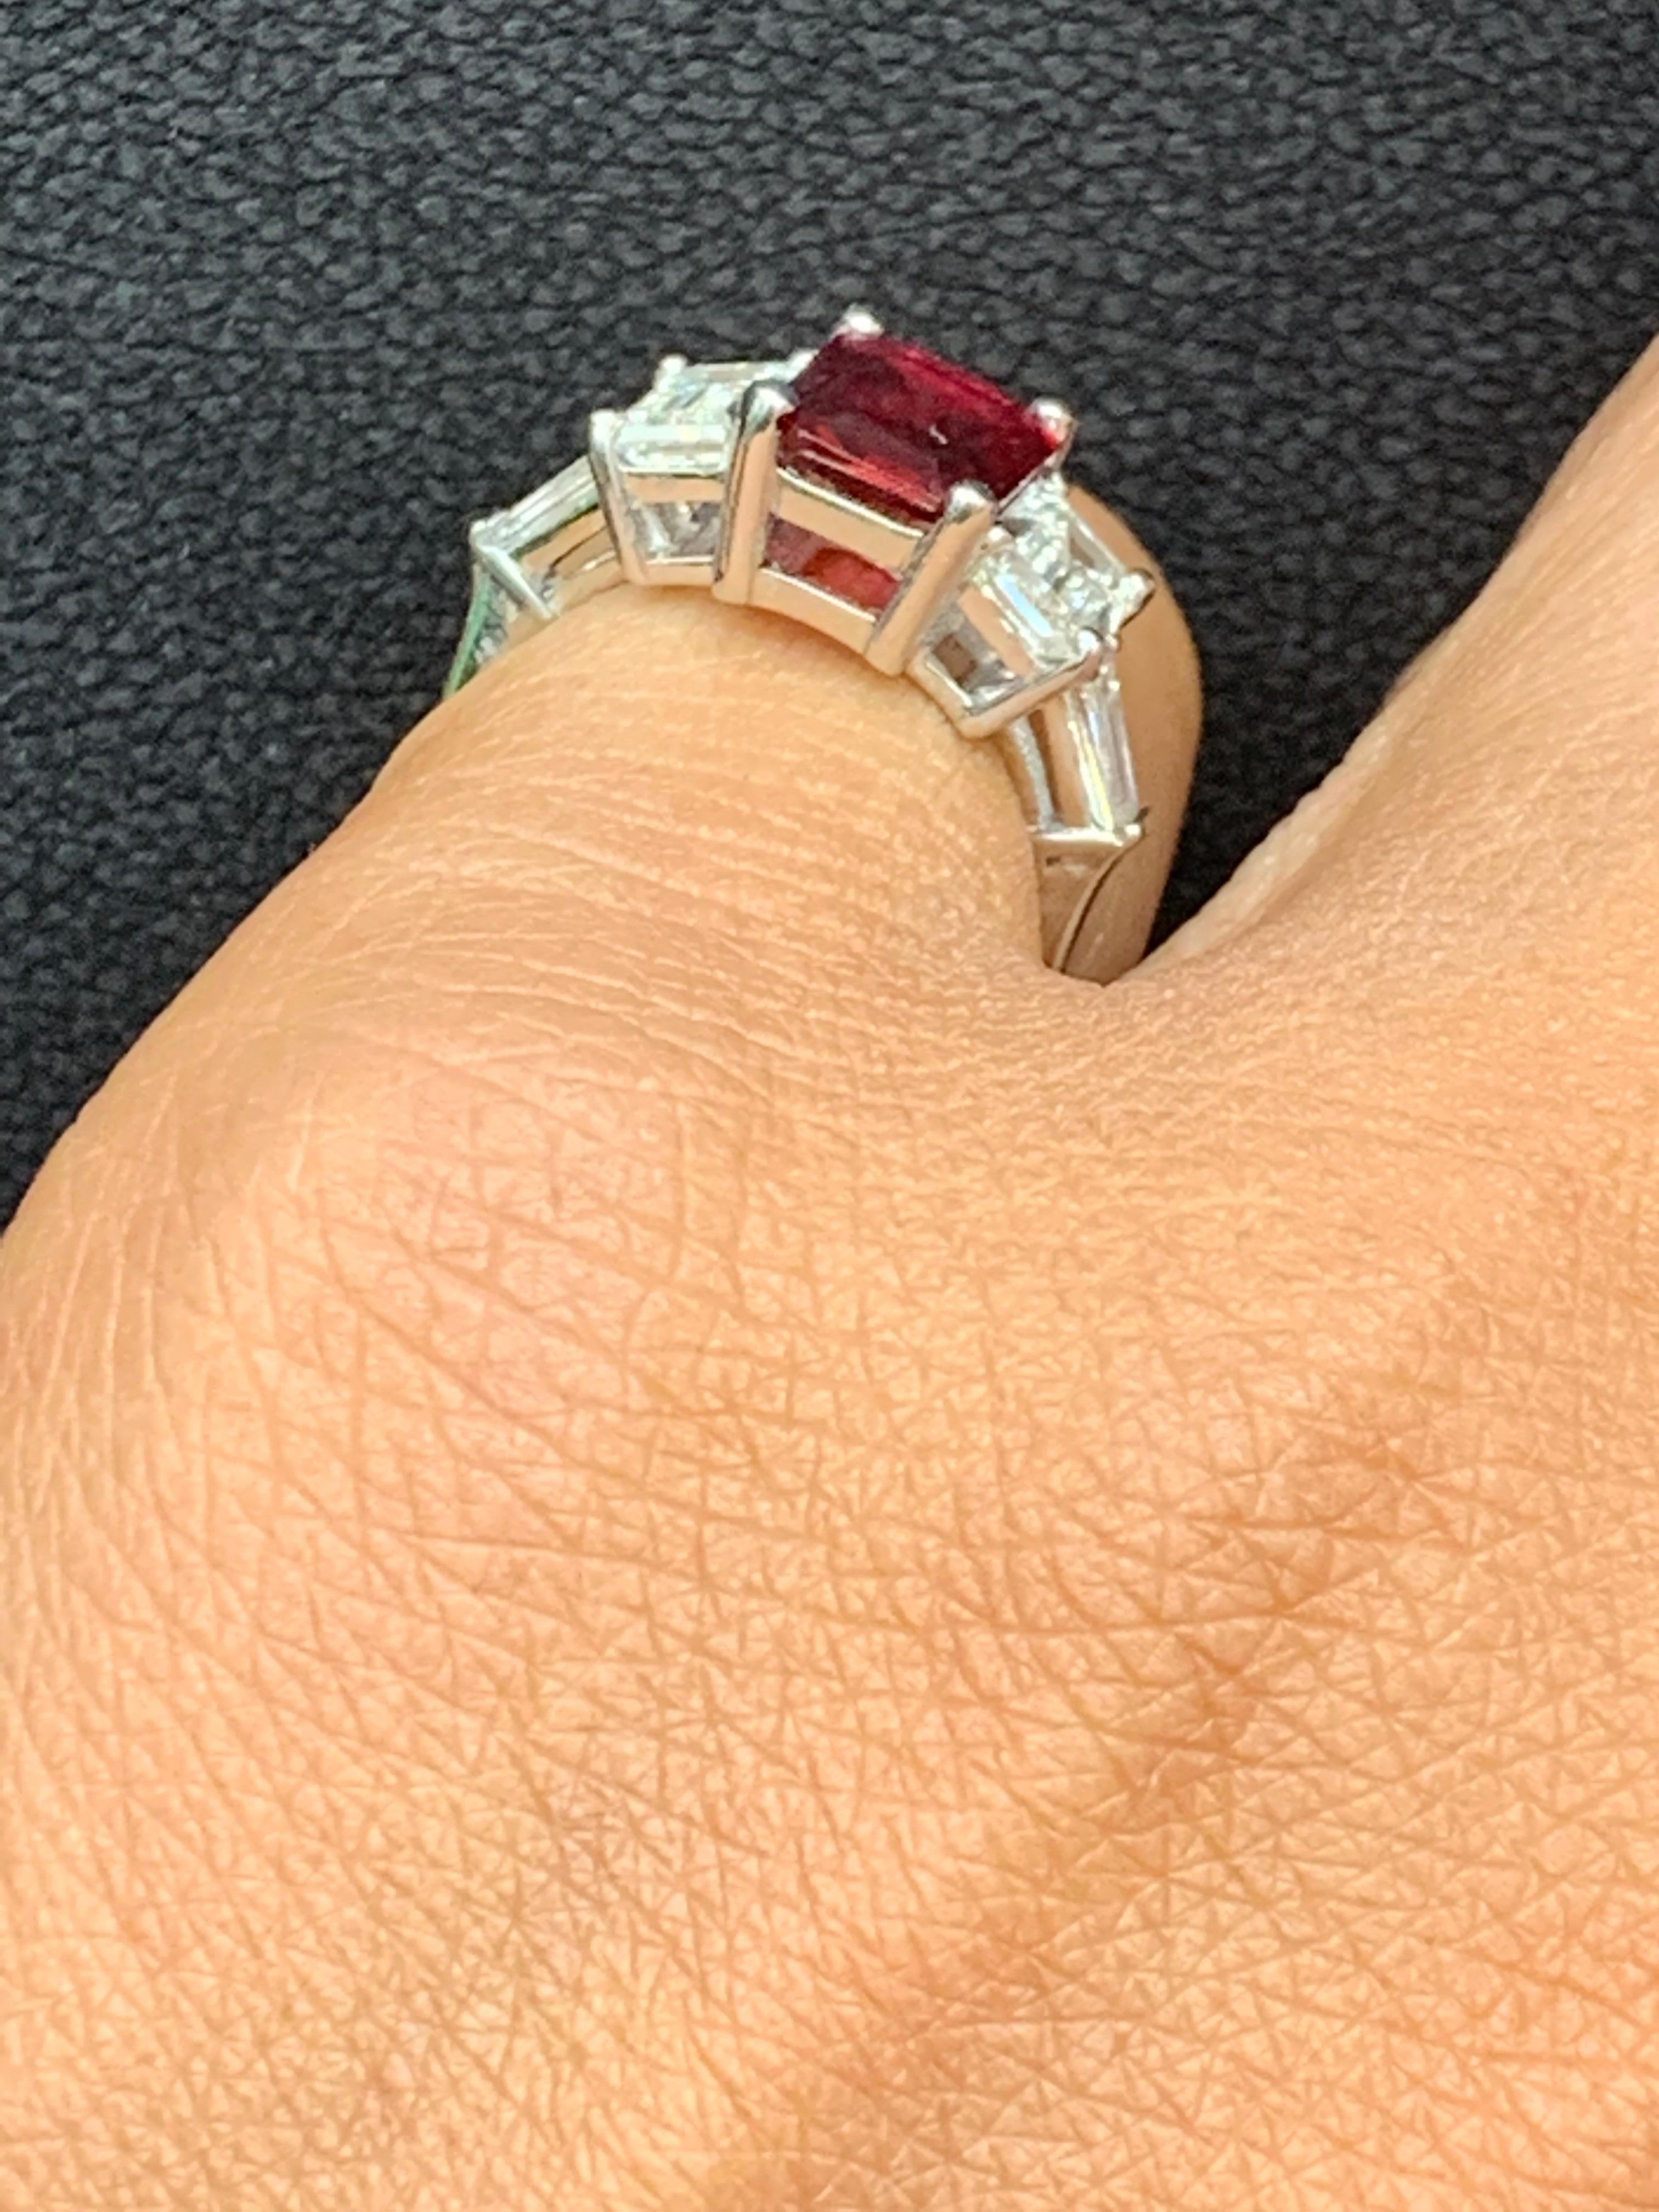 2.04 Carat Emerald Cut Ruby and Diamond Five-Stone Engagement Ring For Sale 1